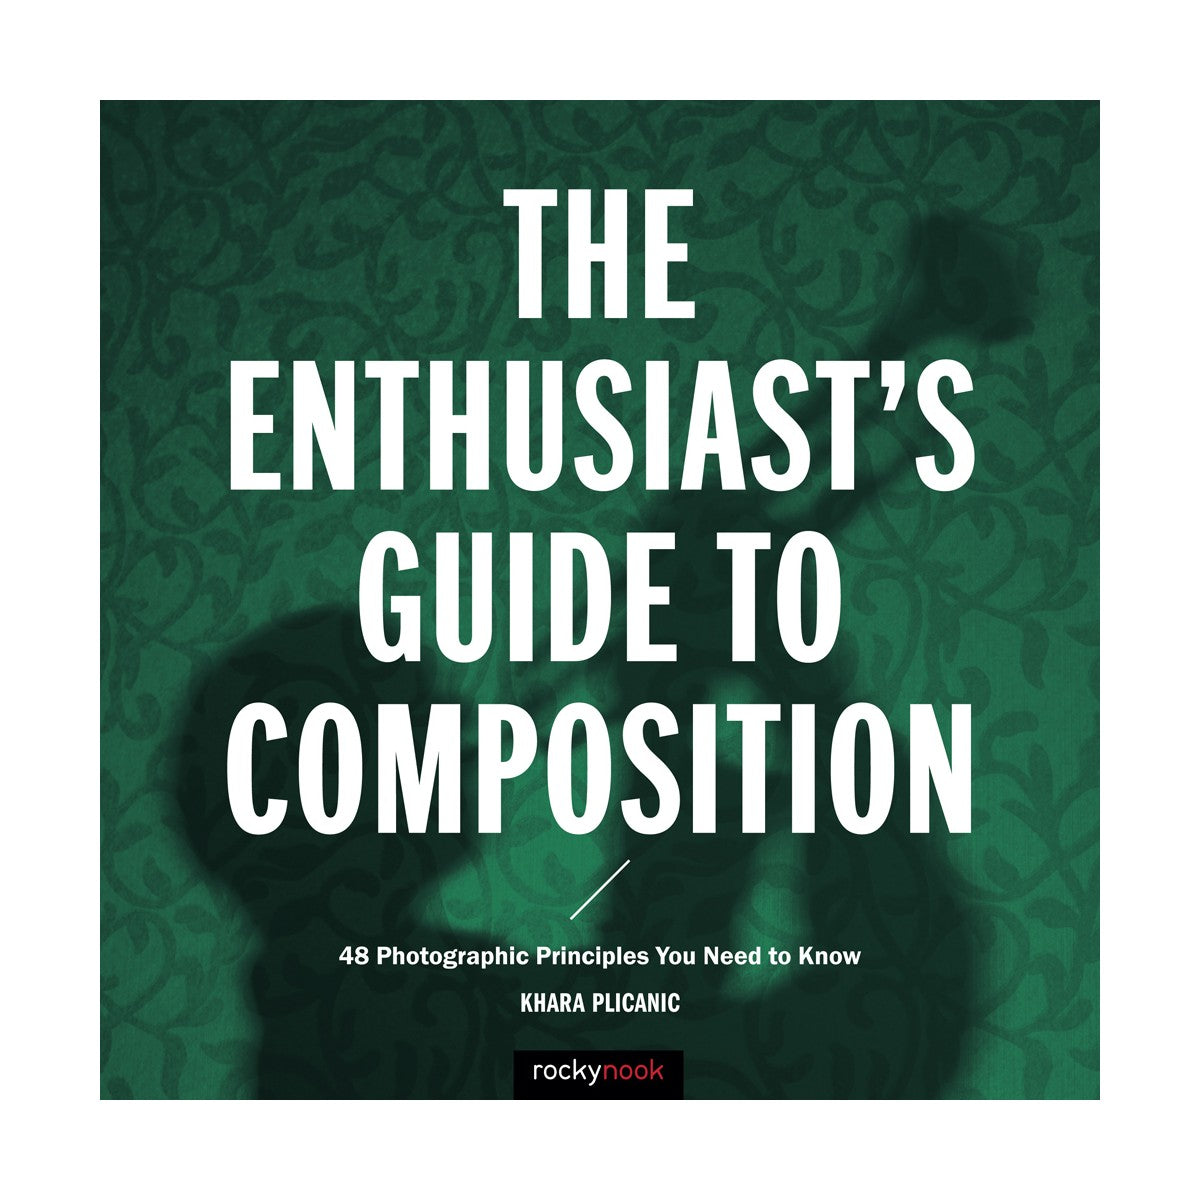 The Enthusiast's Guide to Composition Book